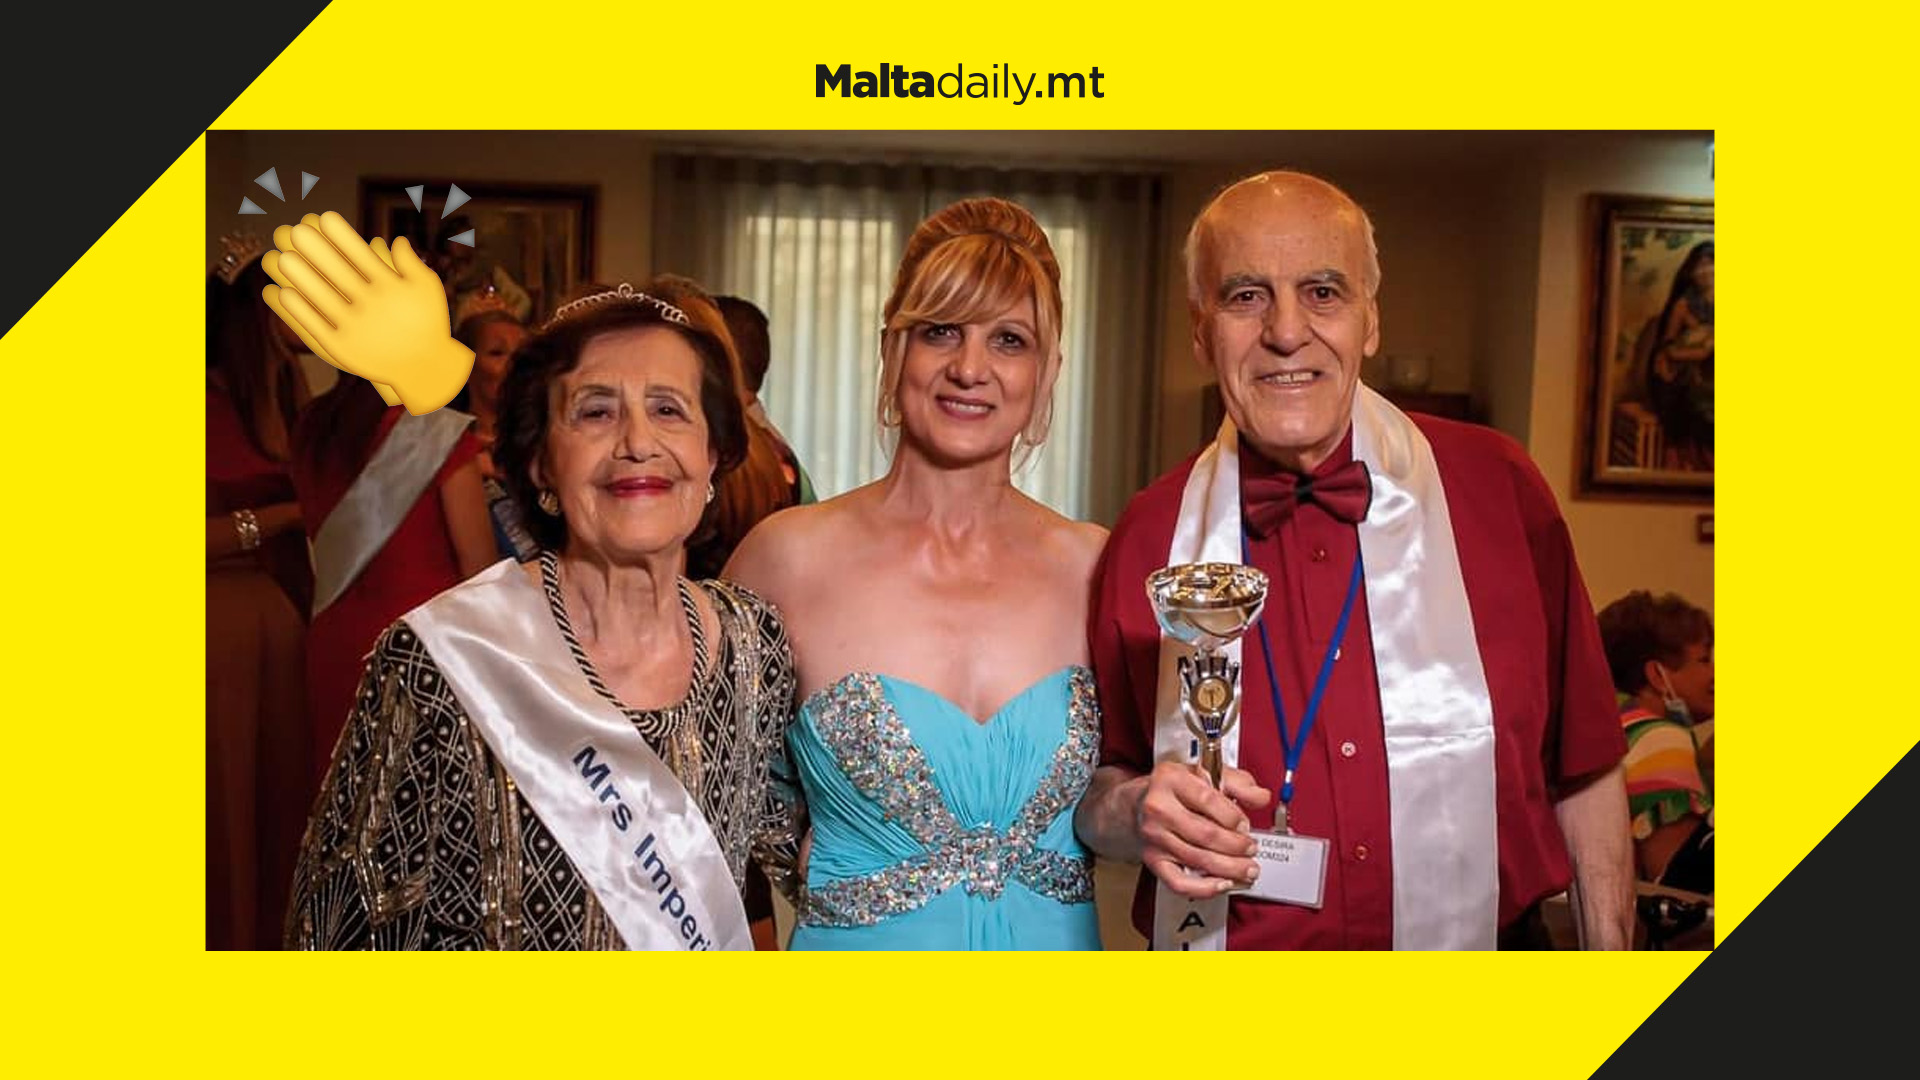 92-year-old queen wins beauty pageant organised by elderly home